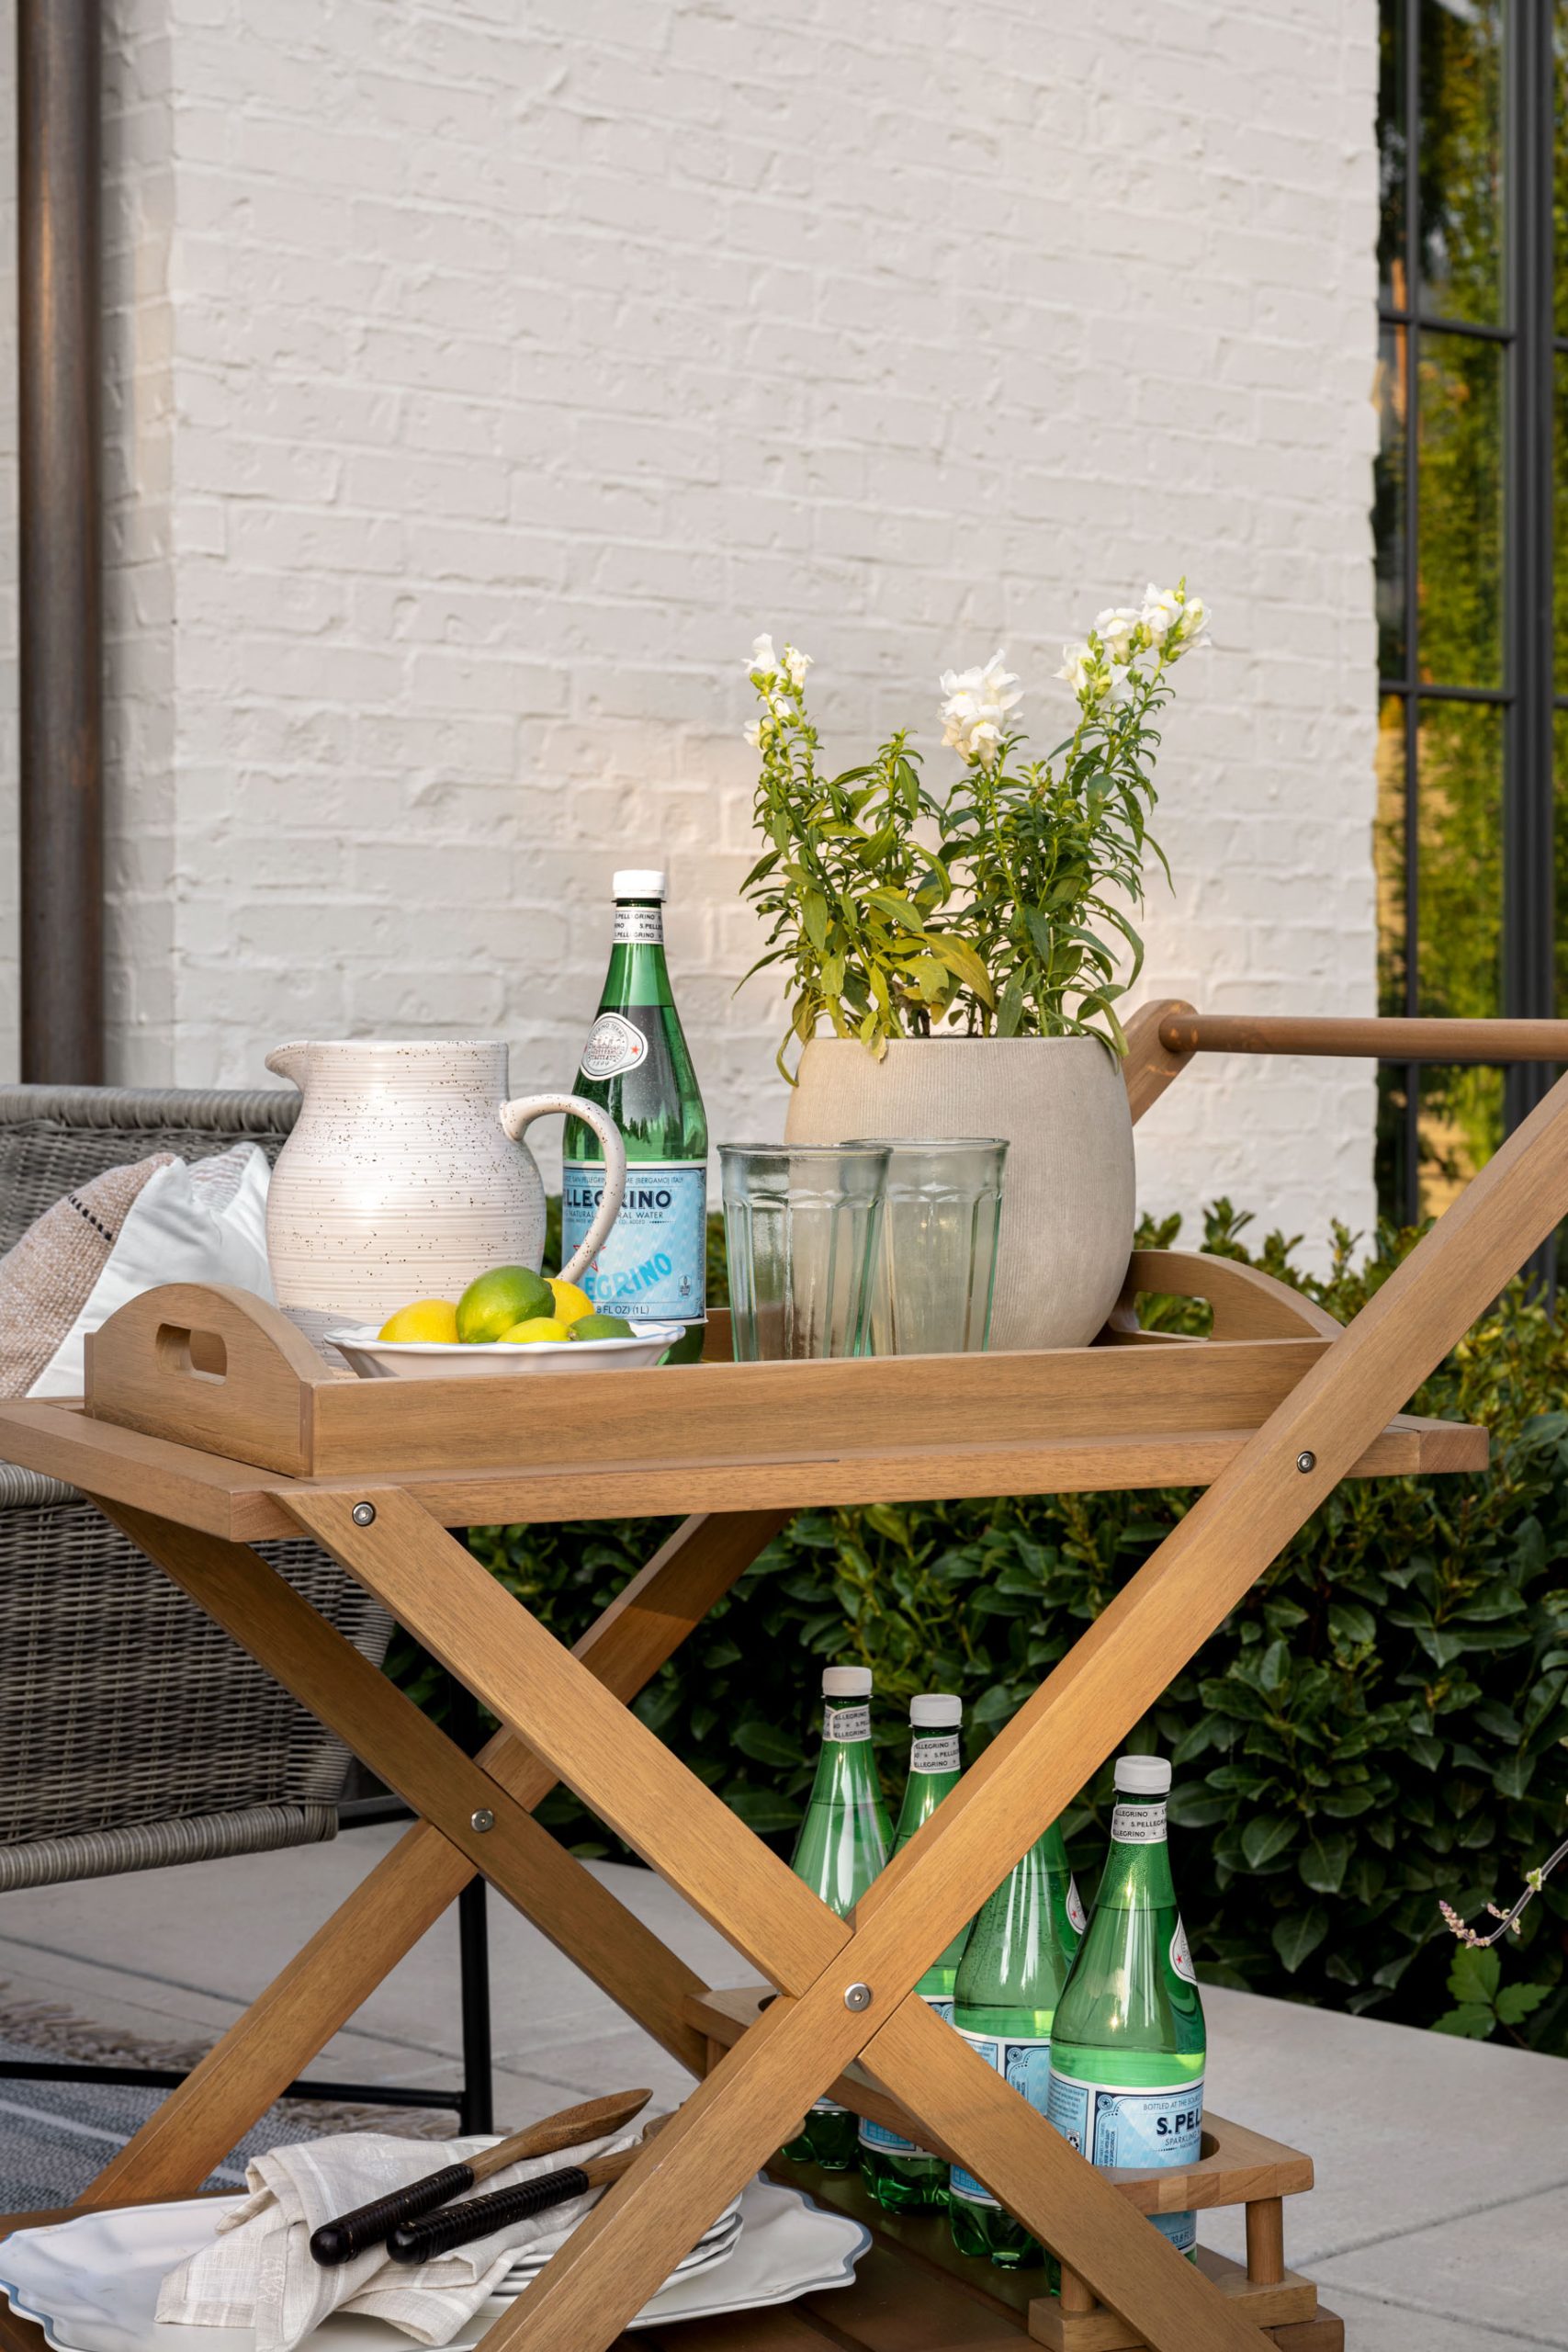 Outdoor wood cart with drinks and planter